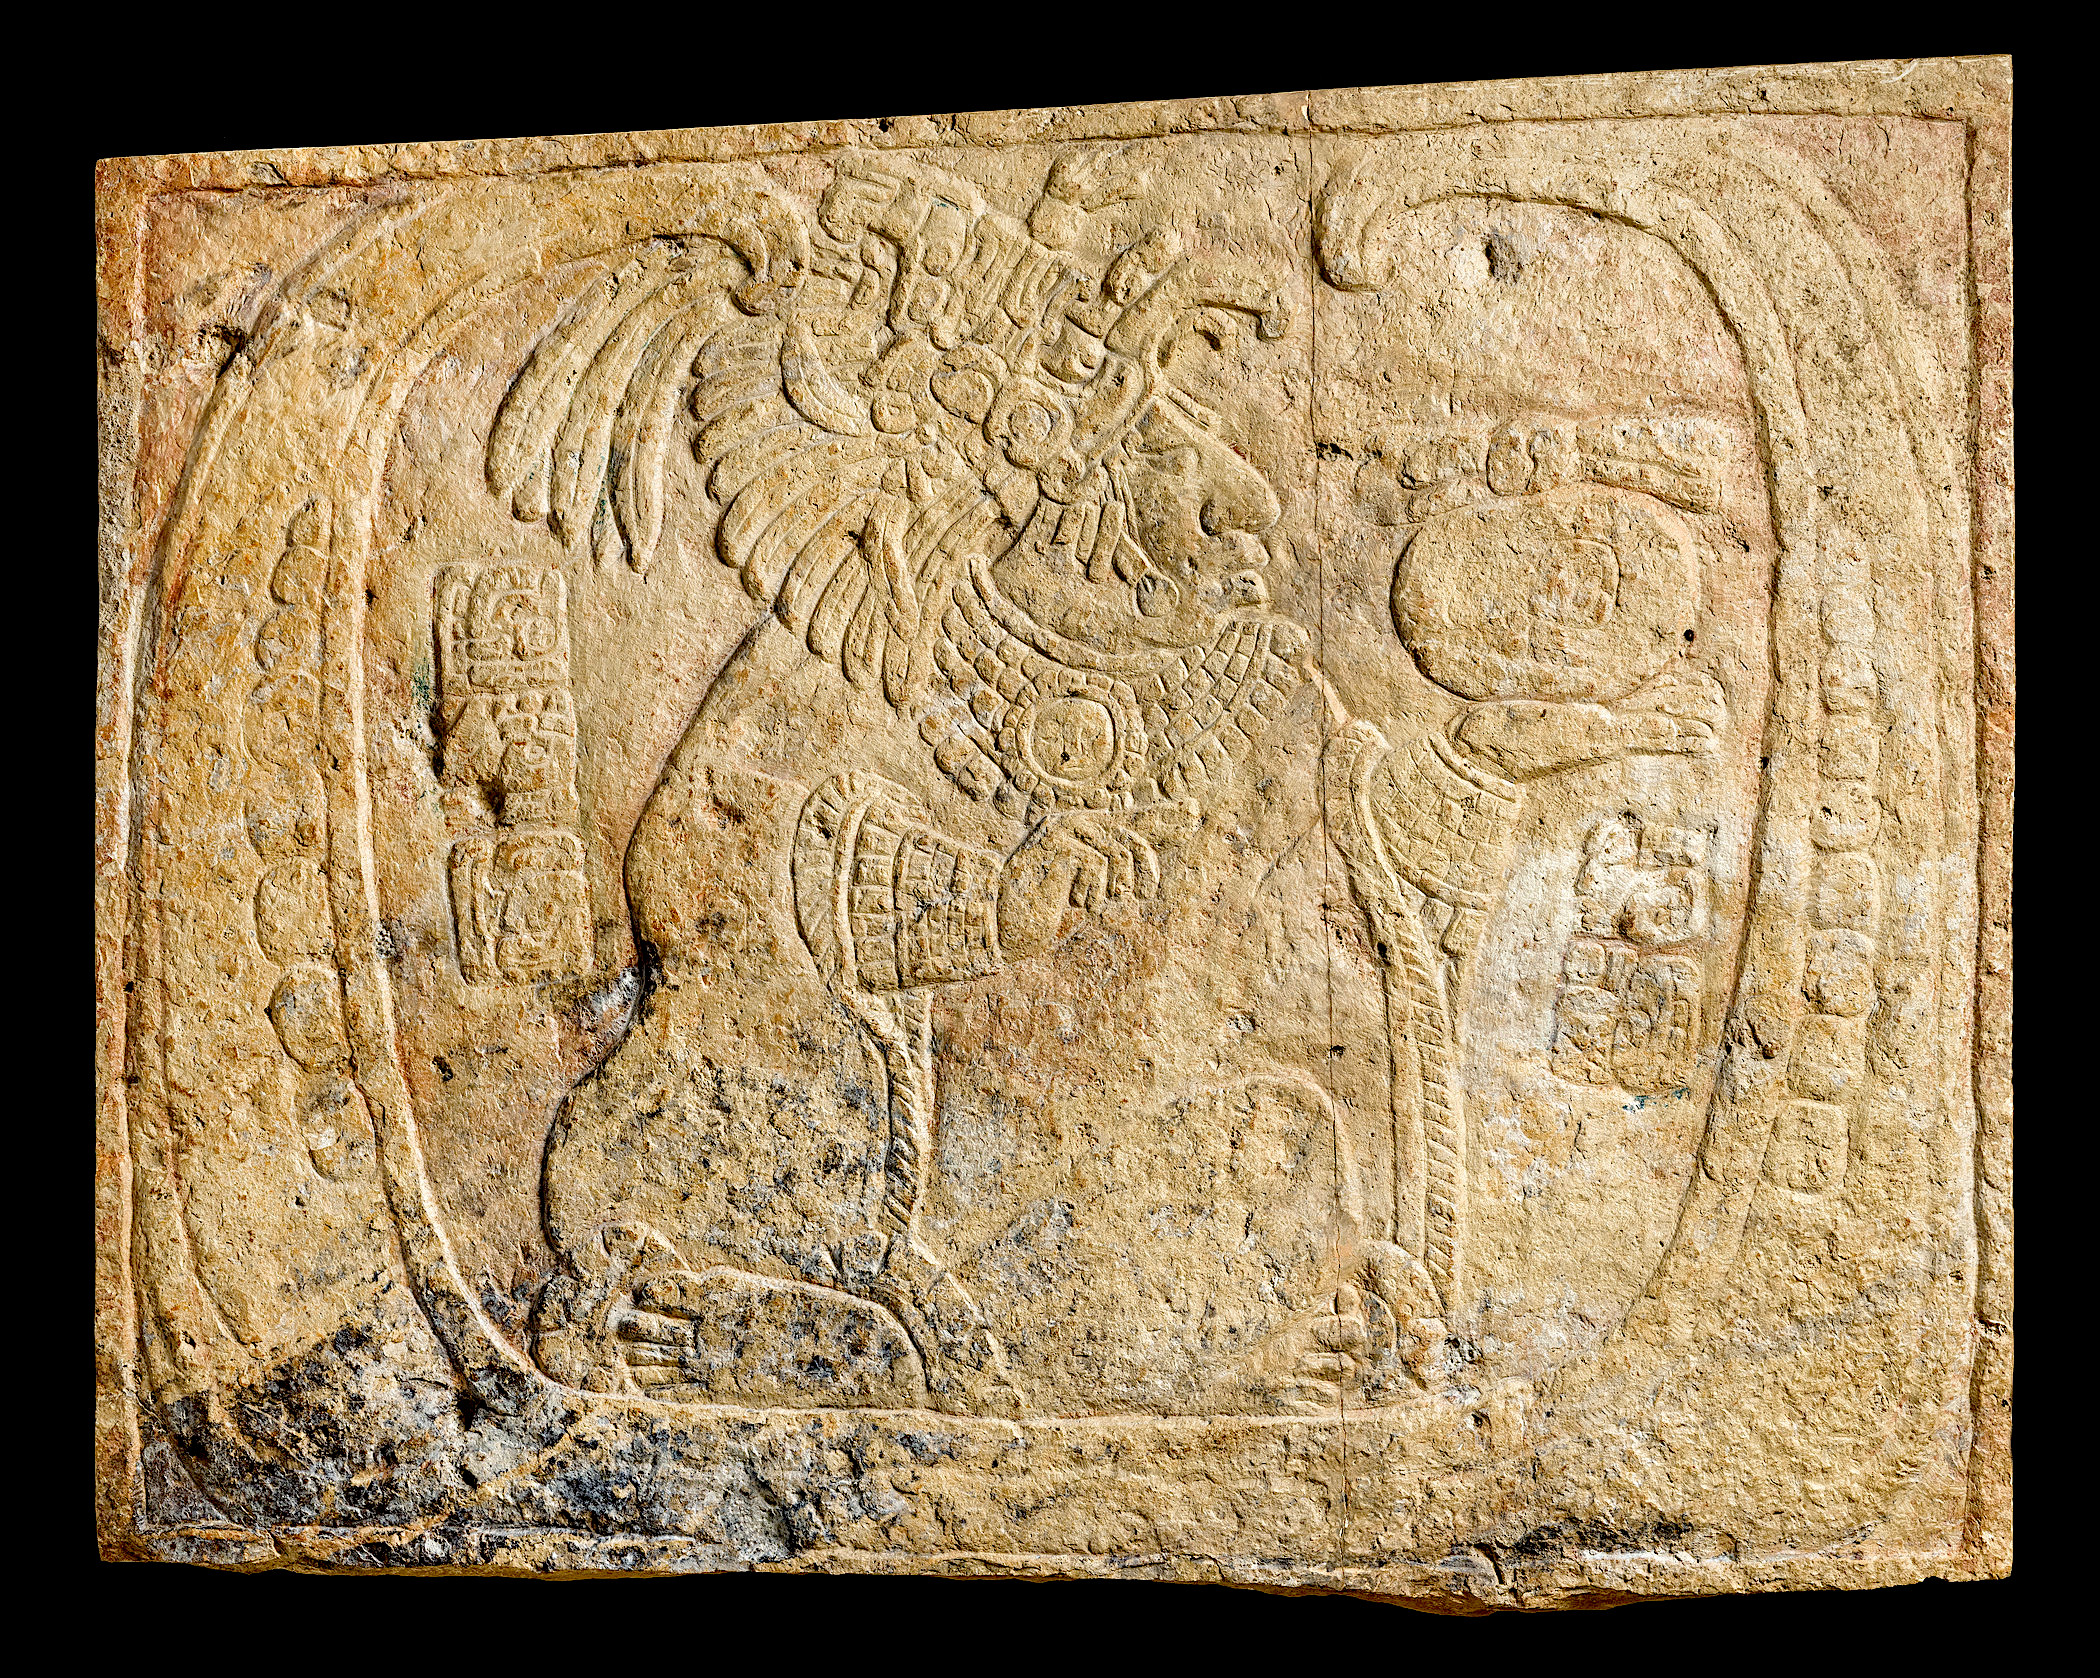 Carved Door Lintel with Female in Moon Cartouche, Maya, Guatemala or Mexico, Peten or Chiapas, Usumacinta River Valley, nearby Yaxchilán, Maya, 750–850 CE, Los Angeles County Museum of Art, purchased with funds provided by the Shinji Shumekai Ancient Art Fund and Joan Palevsky, photo © Museum Associates/LACMA